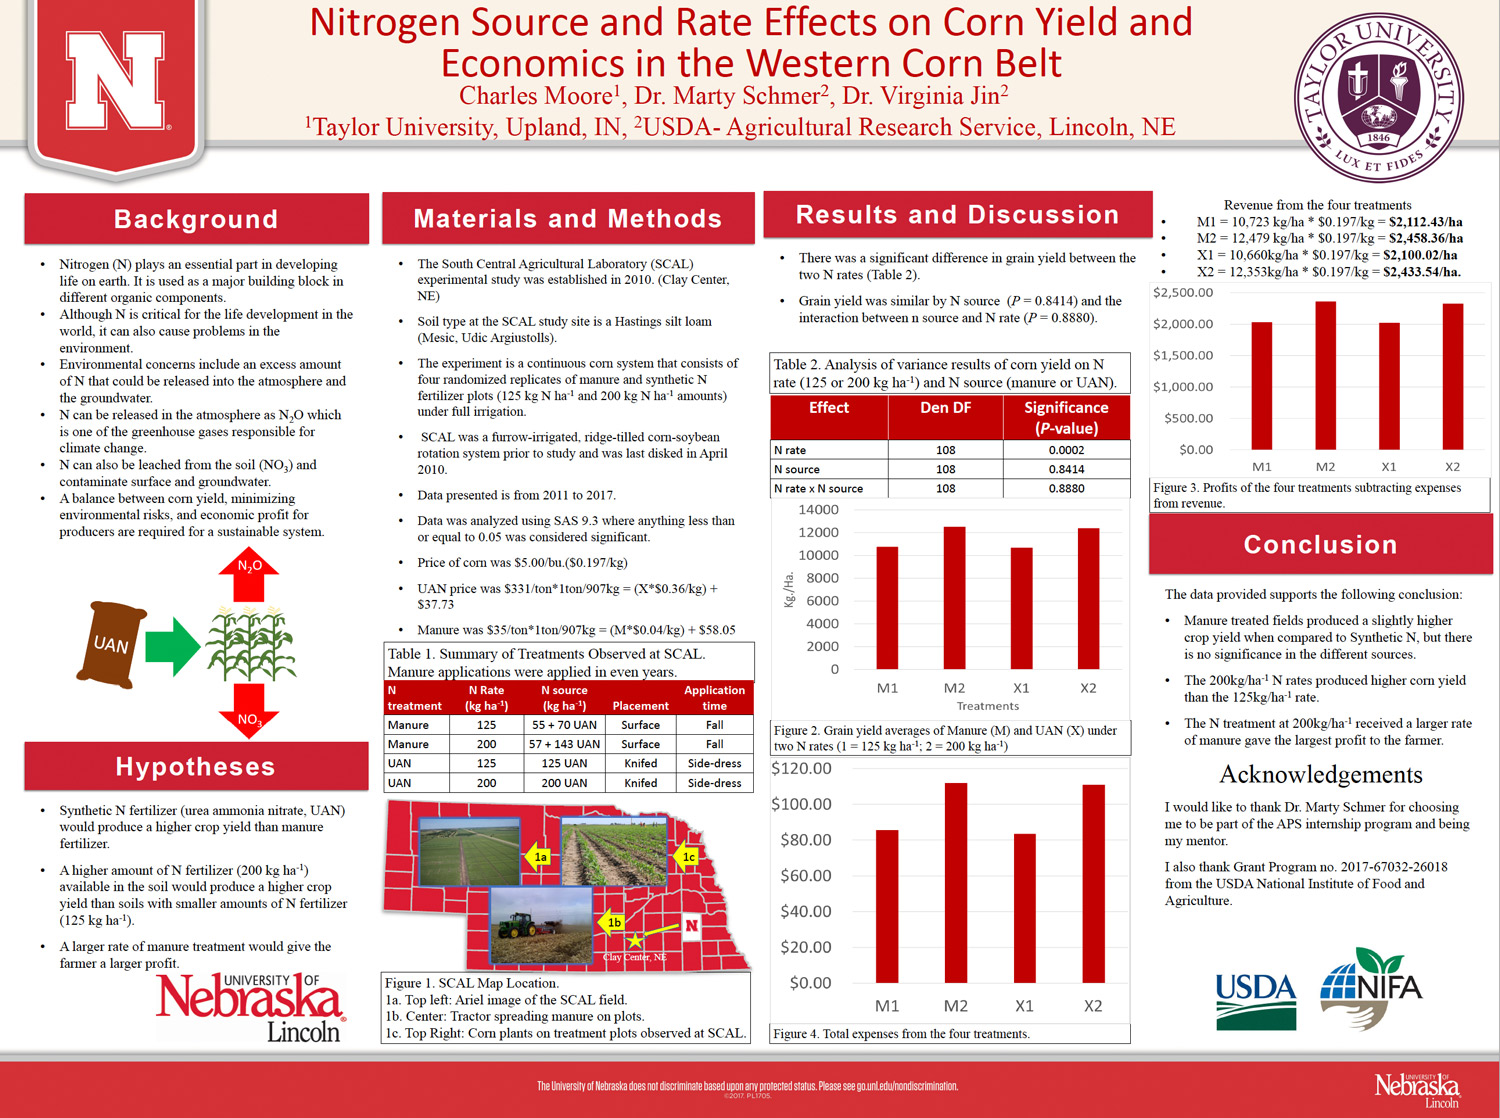 Nitrogen Source and Rate Effects on Corn Yield and Economics in the Western Corn Belt poster